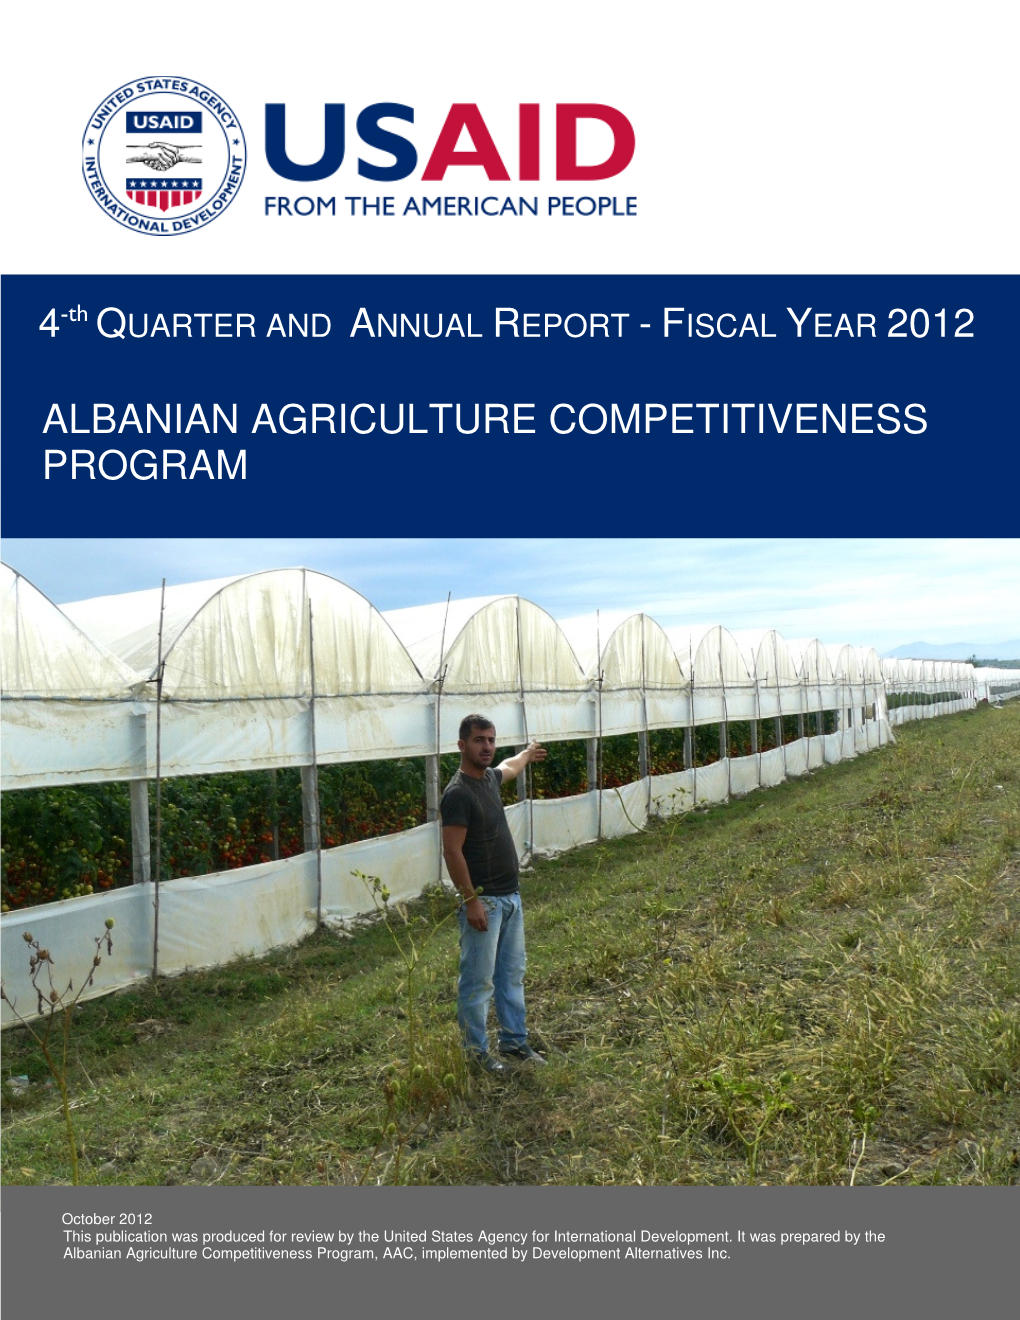 Albanian Agriculture Competitiveness Program, AAC, Implemented by Development Alternatives Inc